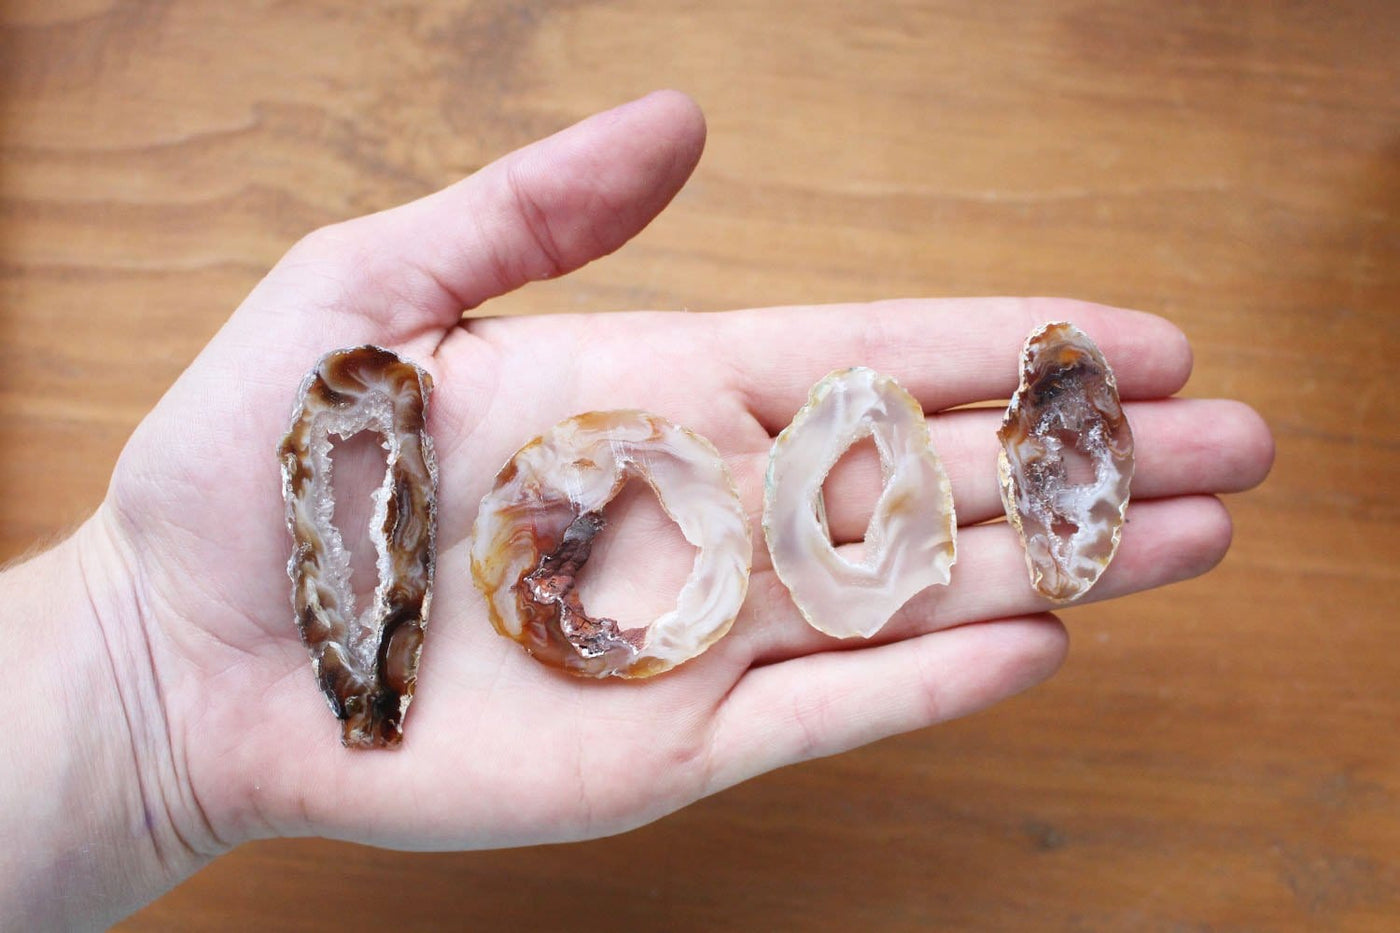 This Picture is showing geode slices displayed in a hand for size reference.